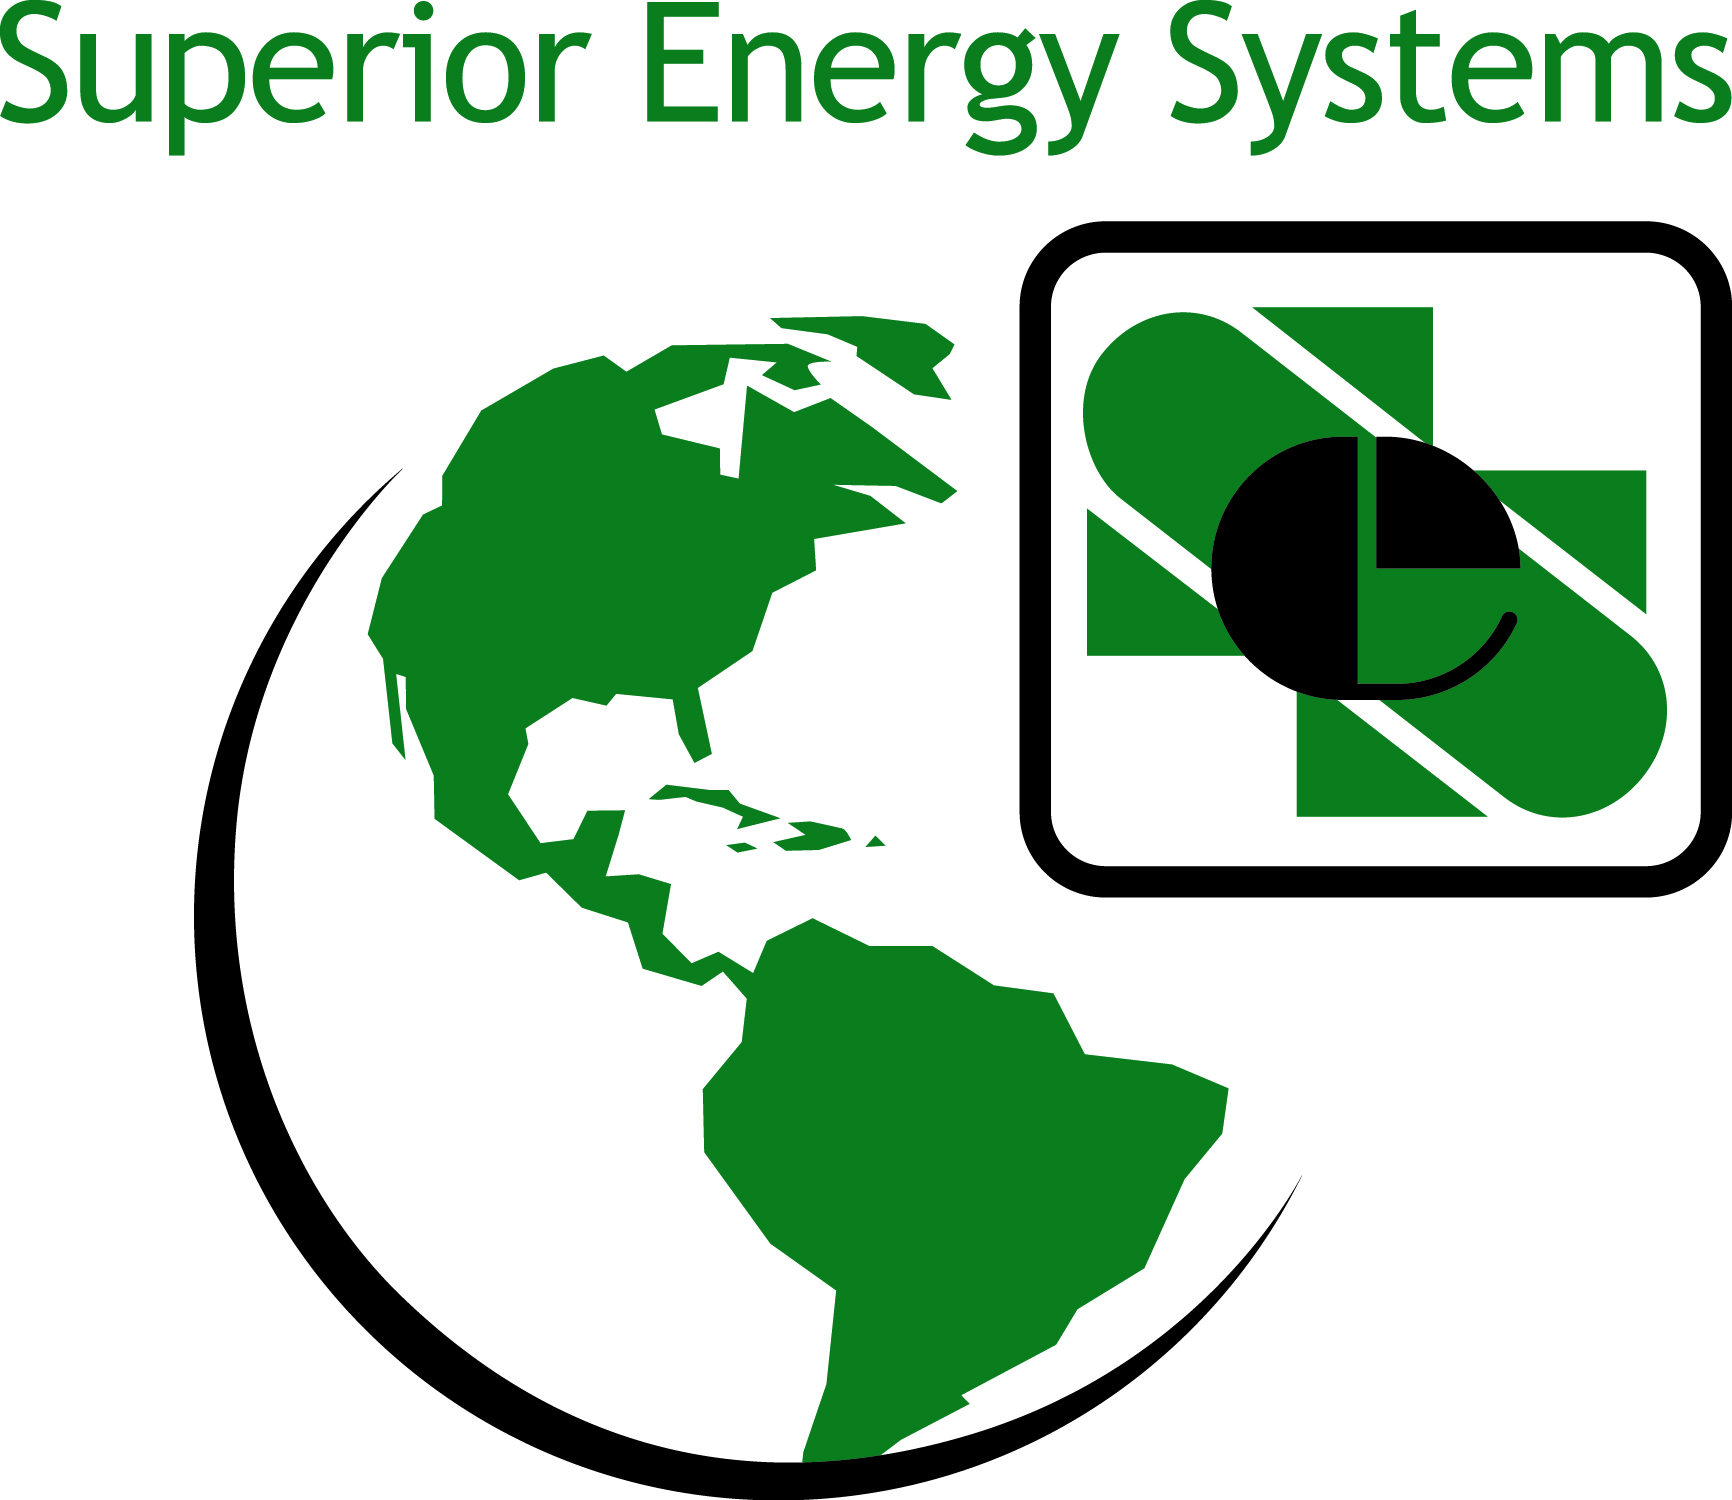 For more than 40 years, Superior Energy Systems has supplied propane infrastructure and services, bringing together engineering, manufacturing and construction expertise focused on turnkey systems.